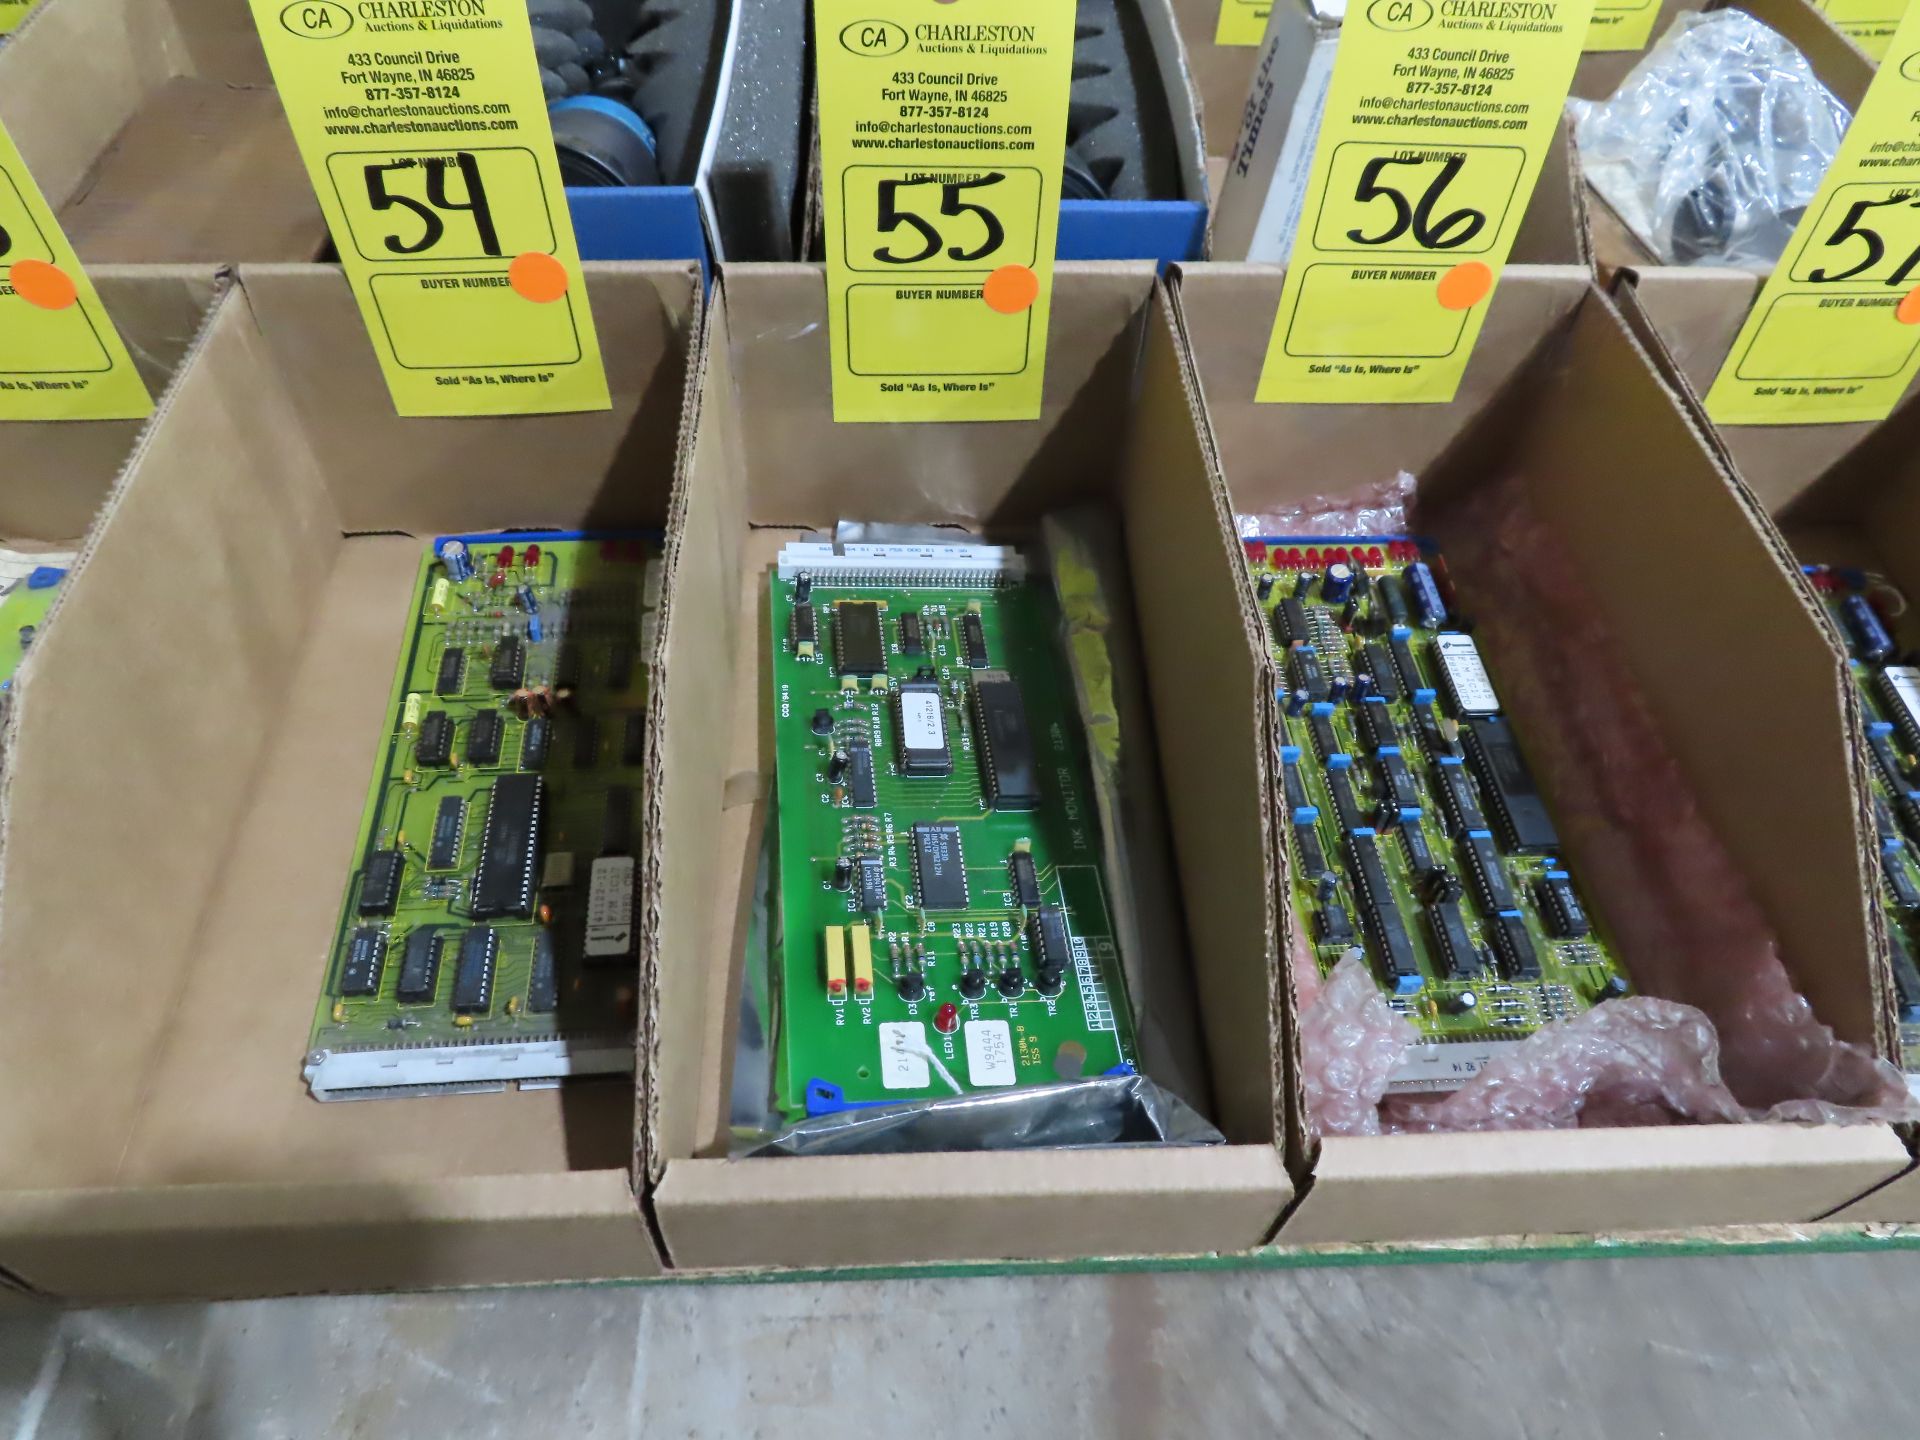 Domino model 21441 board, appears new, as always with Brolyn LLC auctions, all lots can be picked up